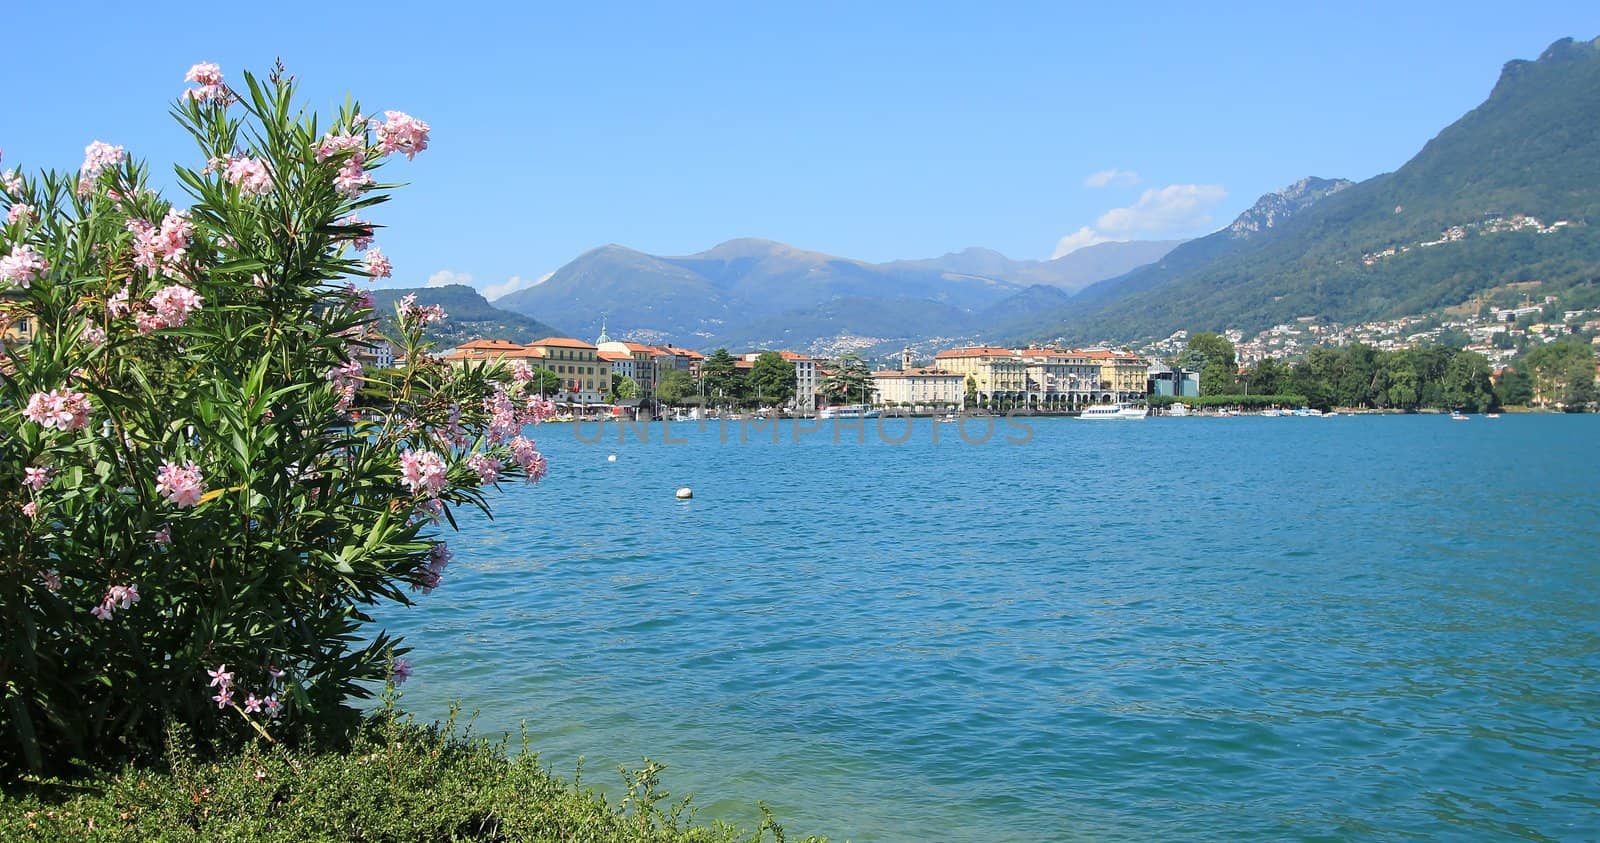 Landscape of Lugano city and lake with alps mountains, Switzerland